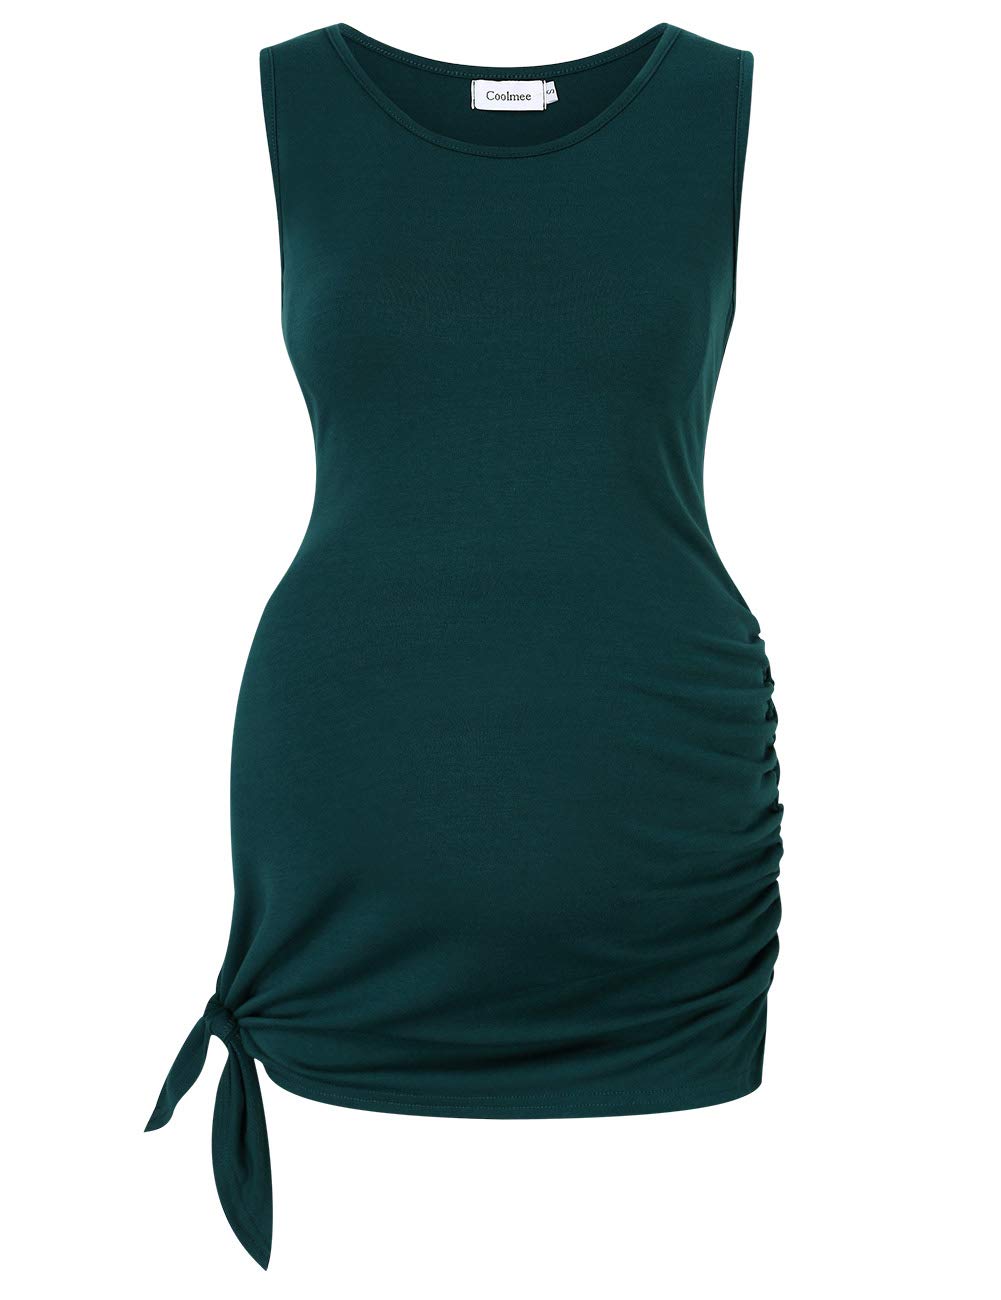 Women's Casual Scoop Neck Sleeveless Solid Color Side Tied Maternity Tunic Top